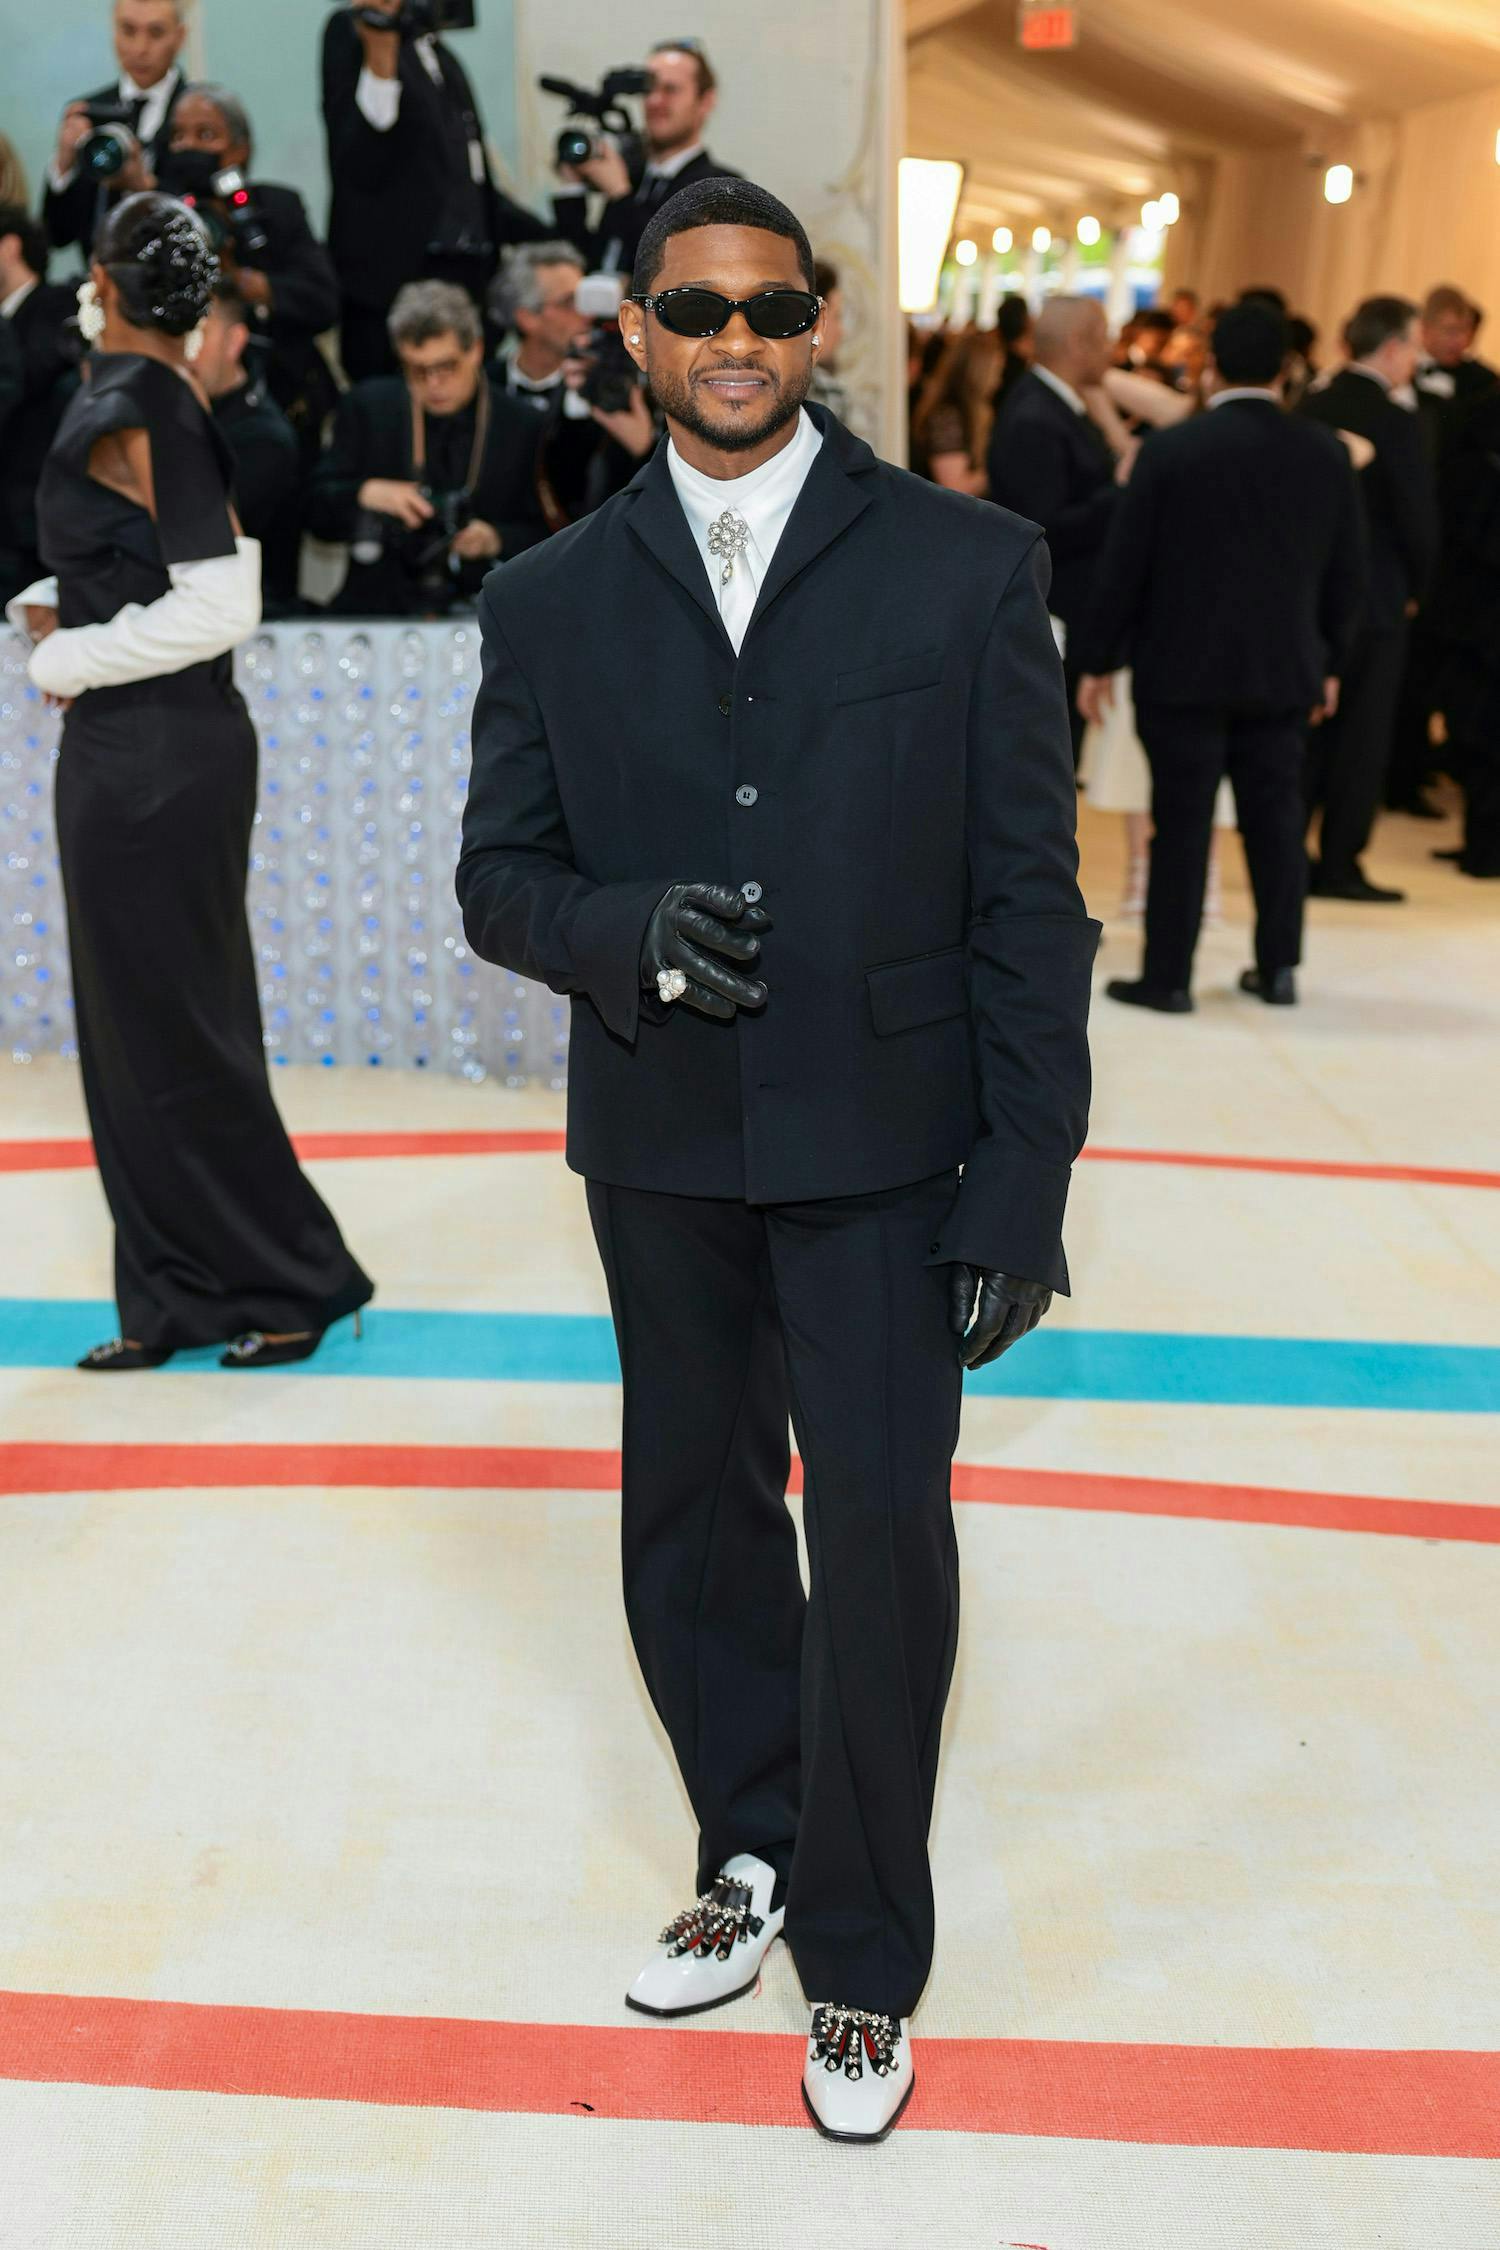 usher in a black suit